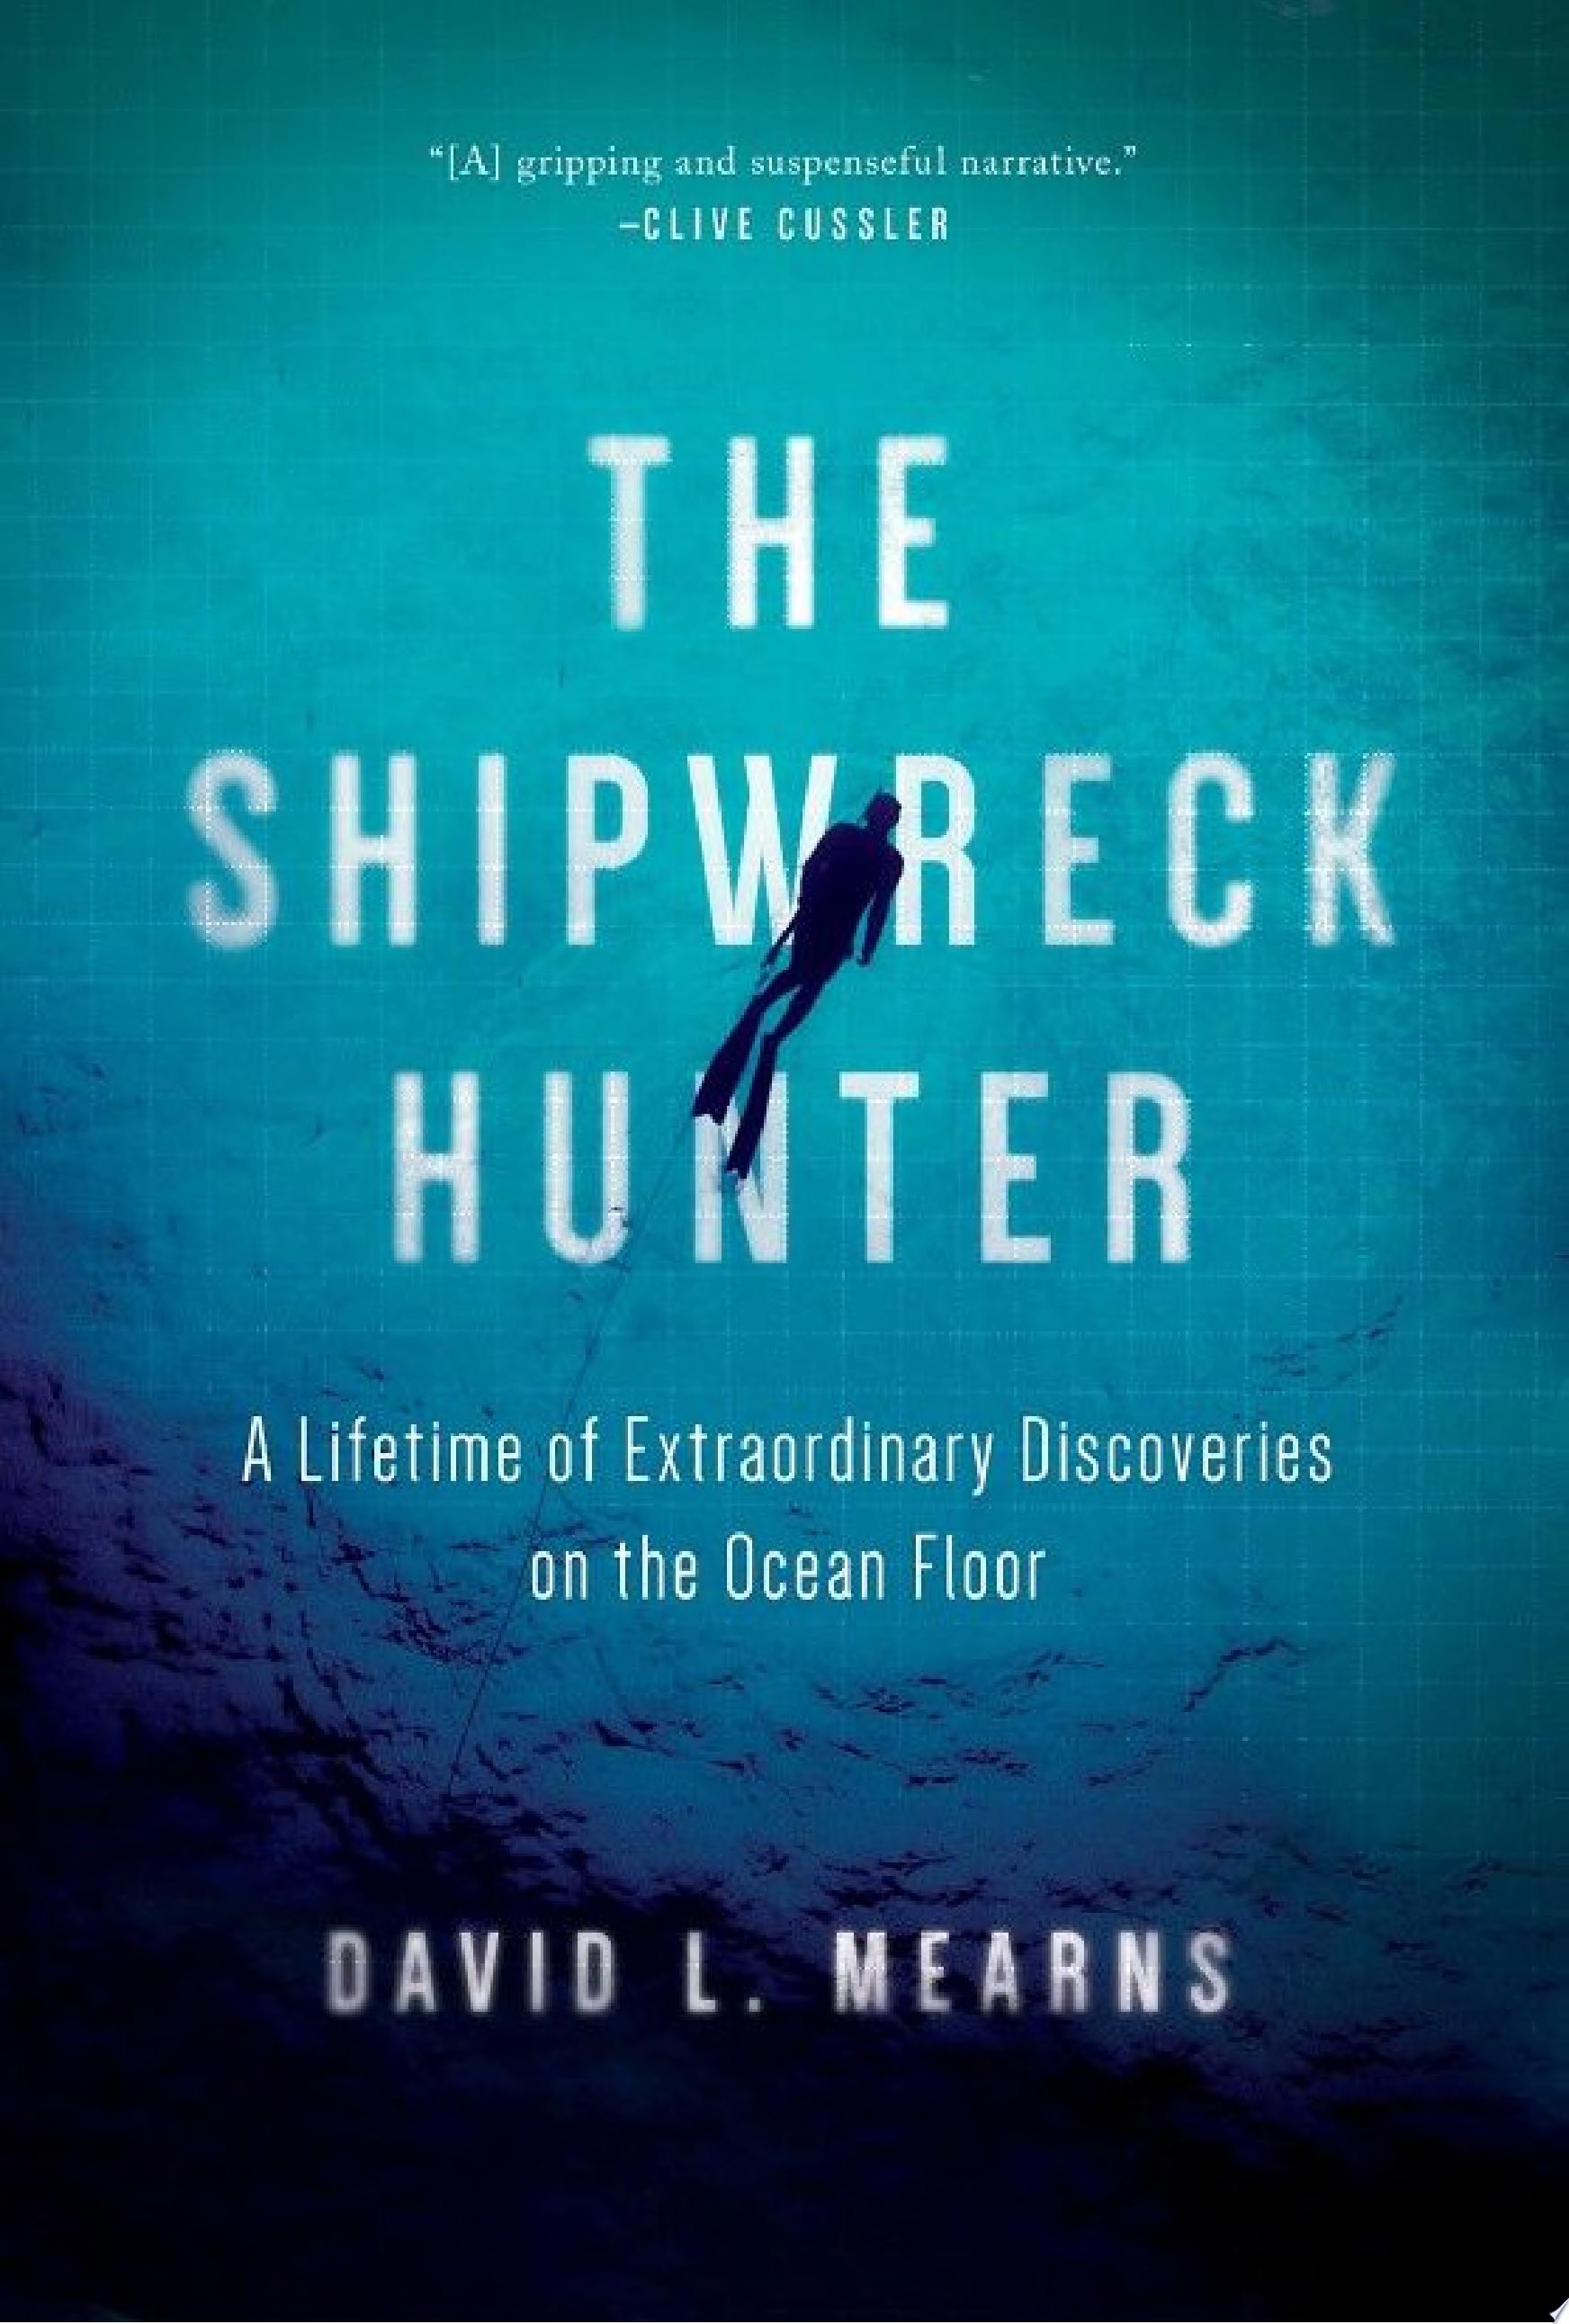 Image for "The Shipwreck Hunter"